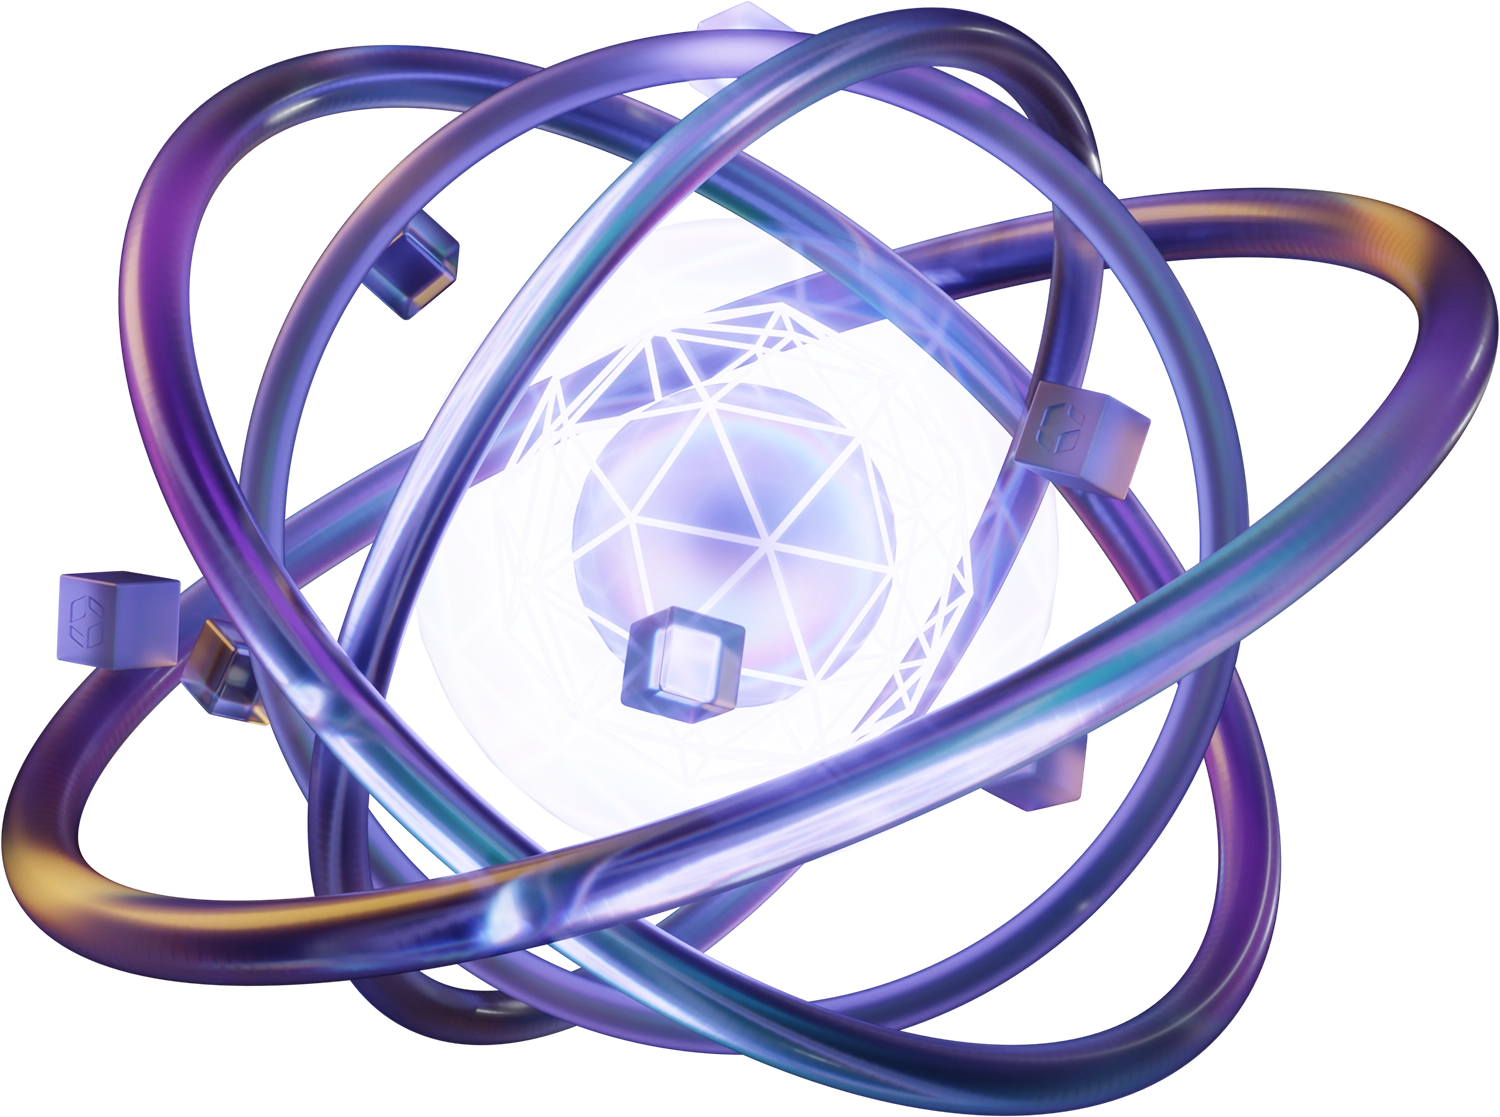 A large glass atom structure surrounding a wireframe cage protecting a glowing sphere.